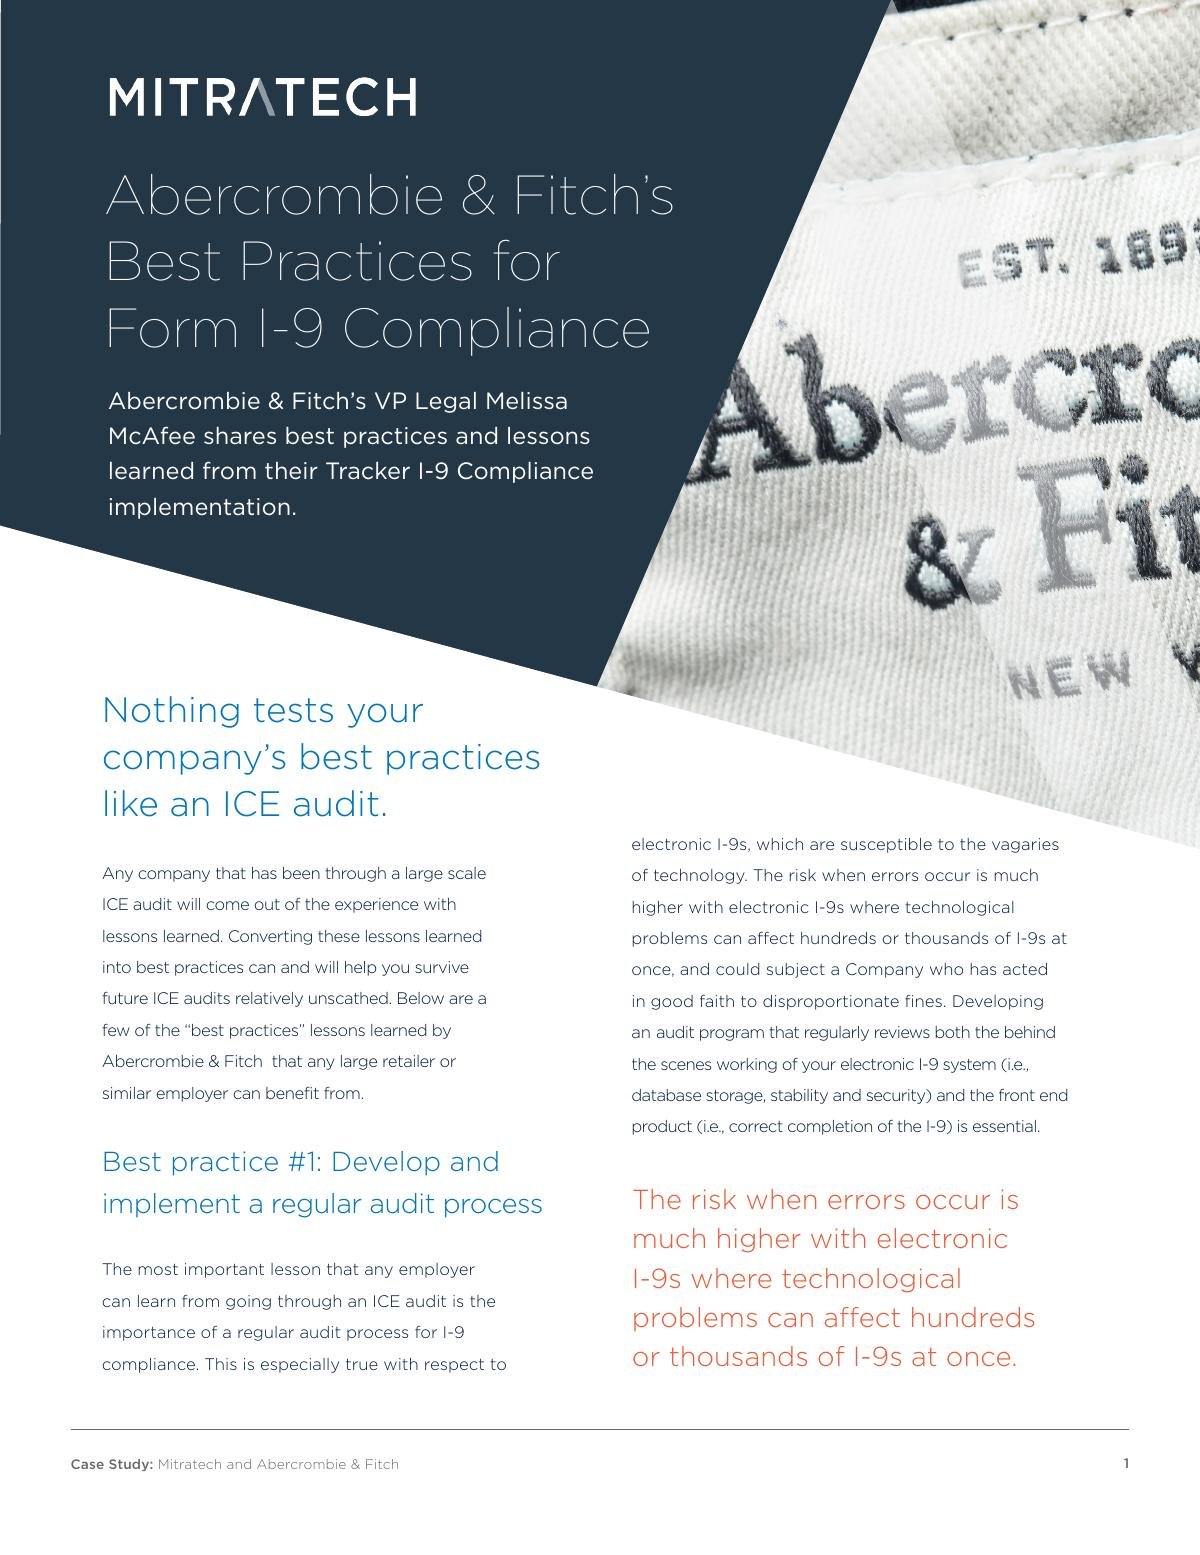 Abercrombie & Fitch's Best Practices for Form I-9 Compliance